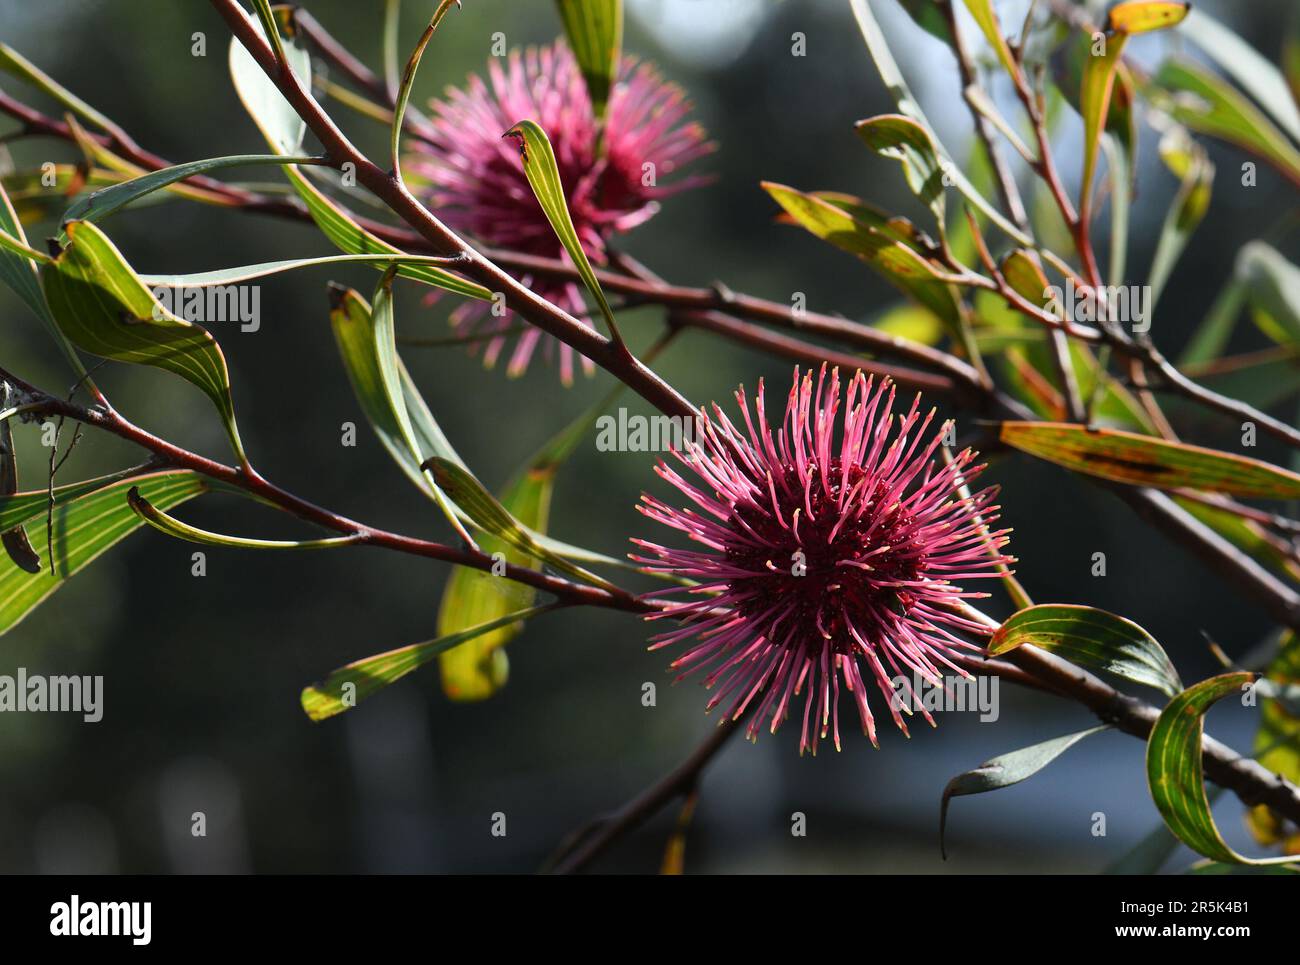 Back lit red pink spiked globular flowers of the Western Australian native Pin Cushion Hakea, Hakea laurina, family Proteaceae Stock Photo